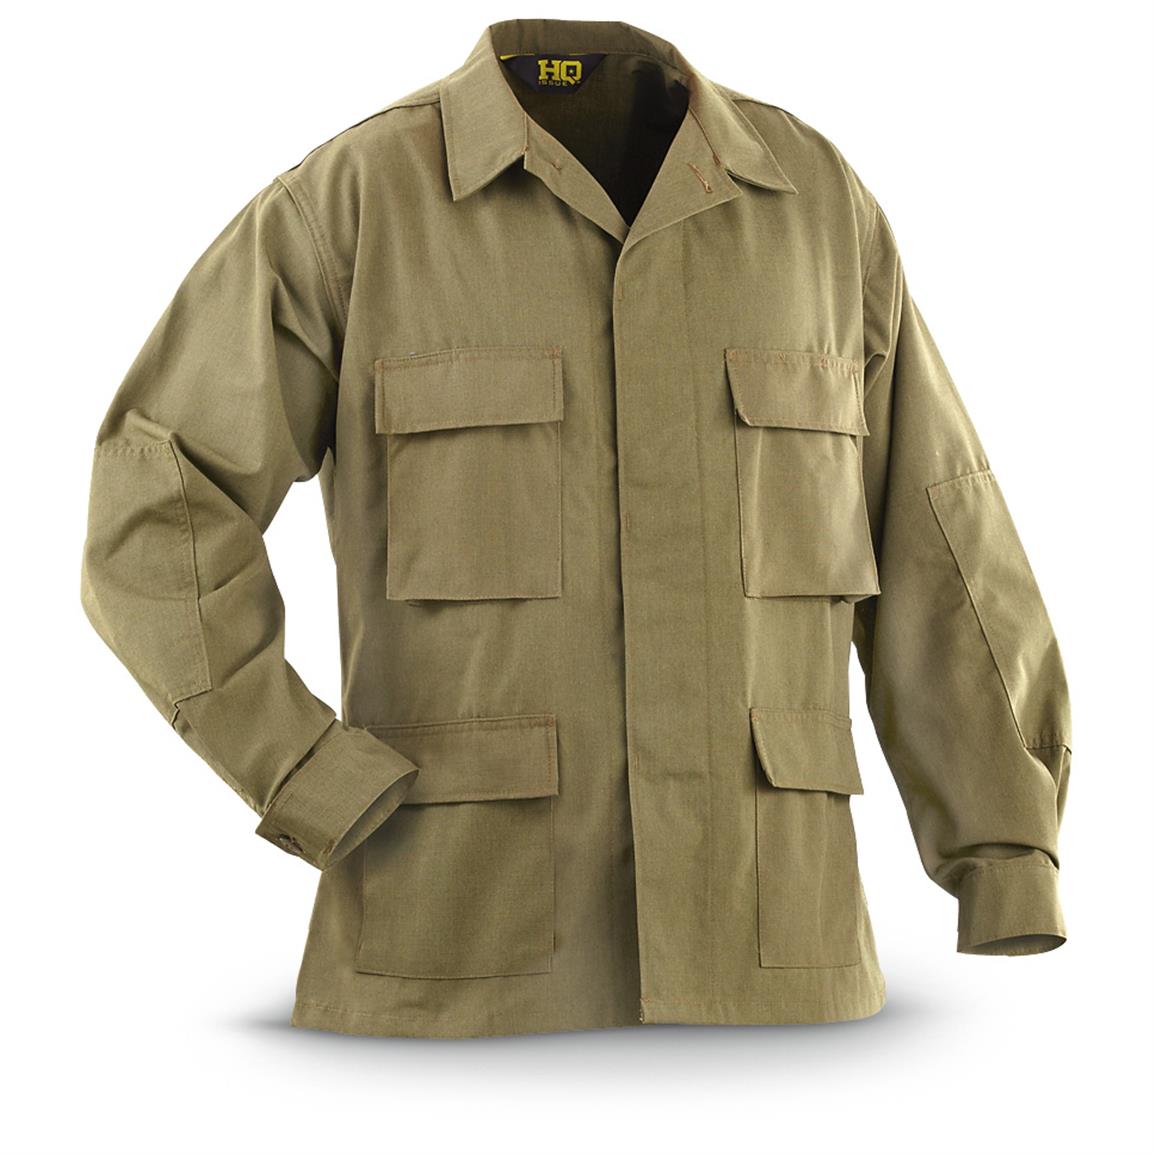 HQ ISSUE Military-style BDU Cotton Ripstop Shirt - 592361, Tactical ...